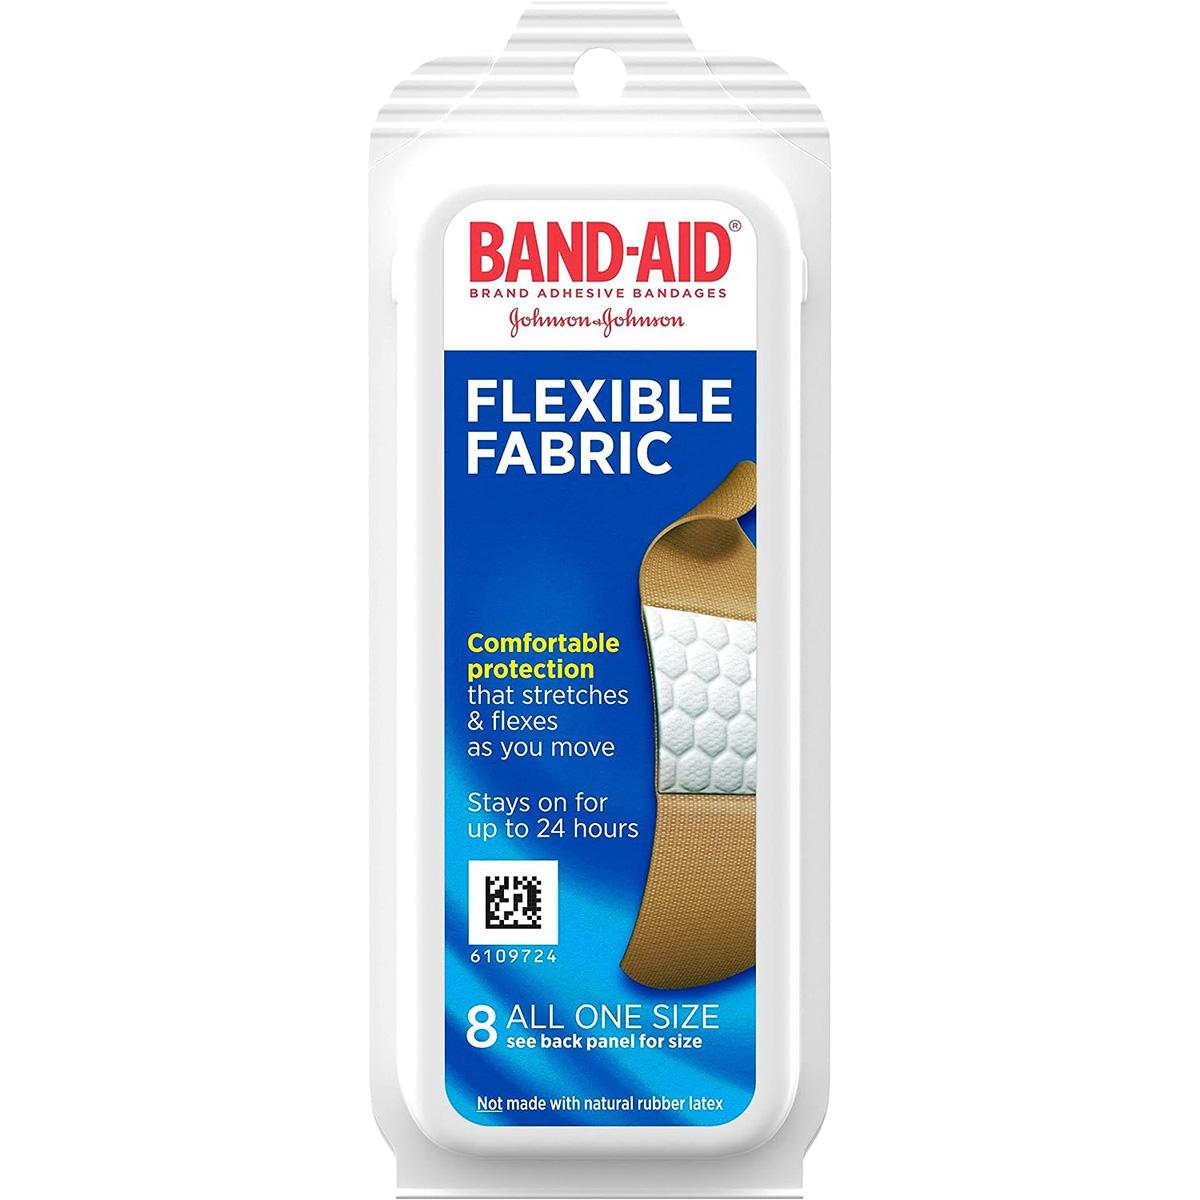 Band-Aid Brand Flexible Fabric Adhesive Bandages for $0.94